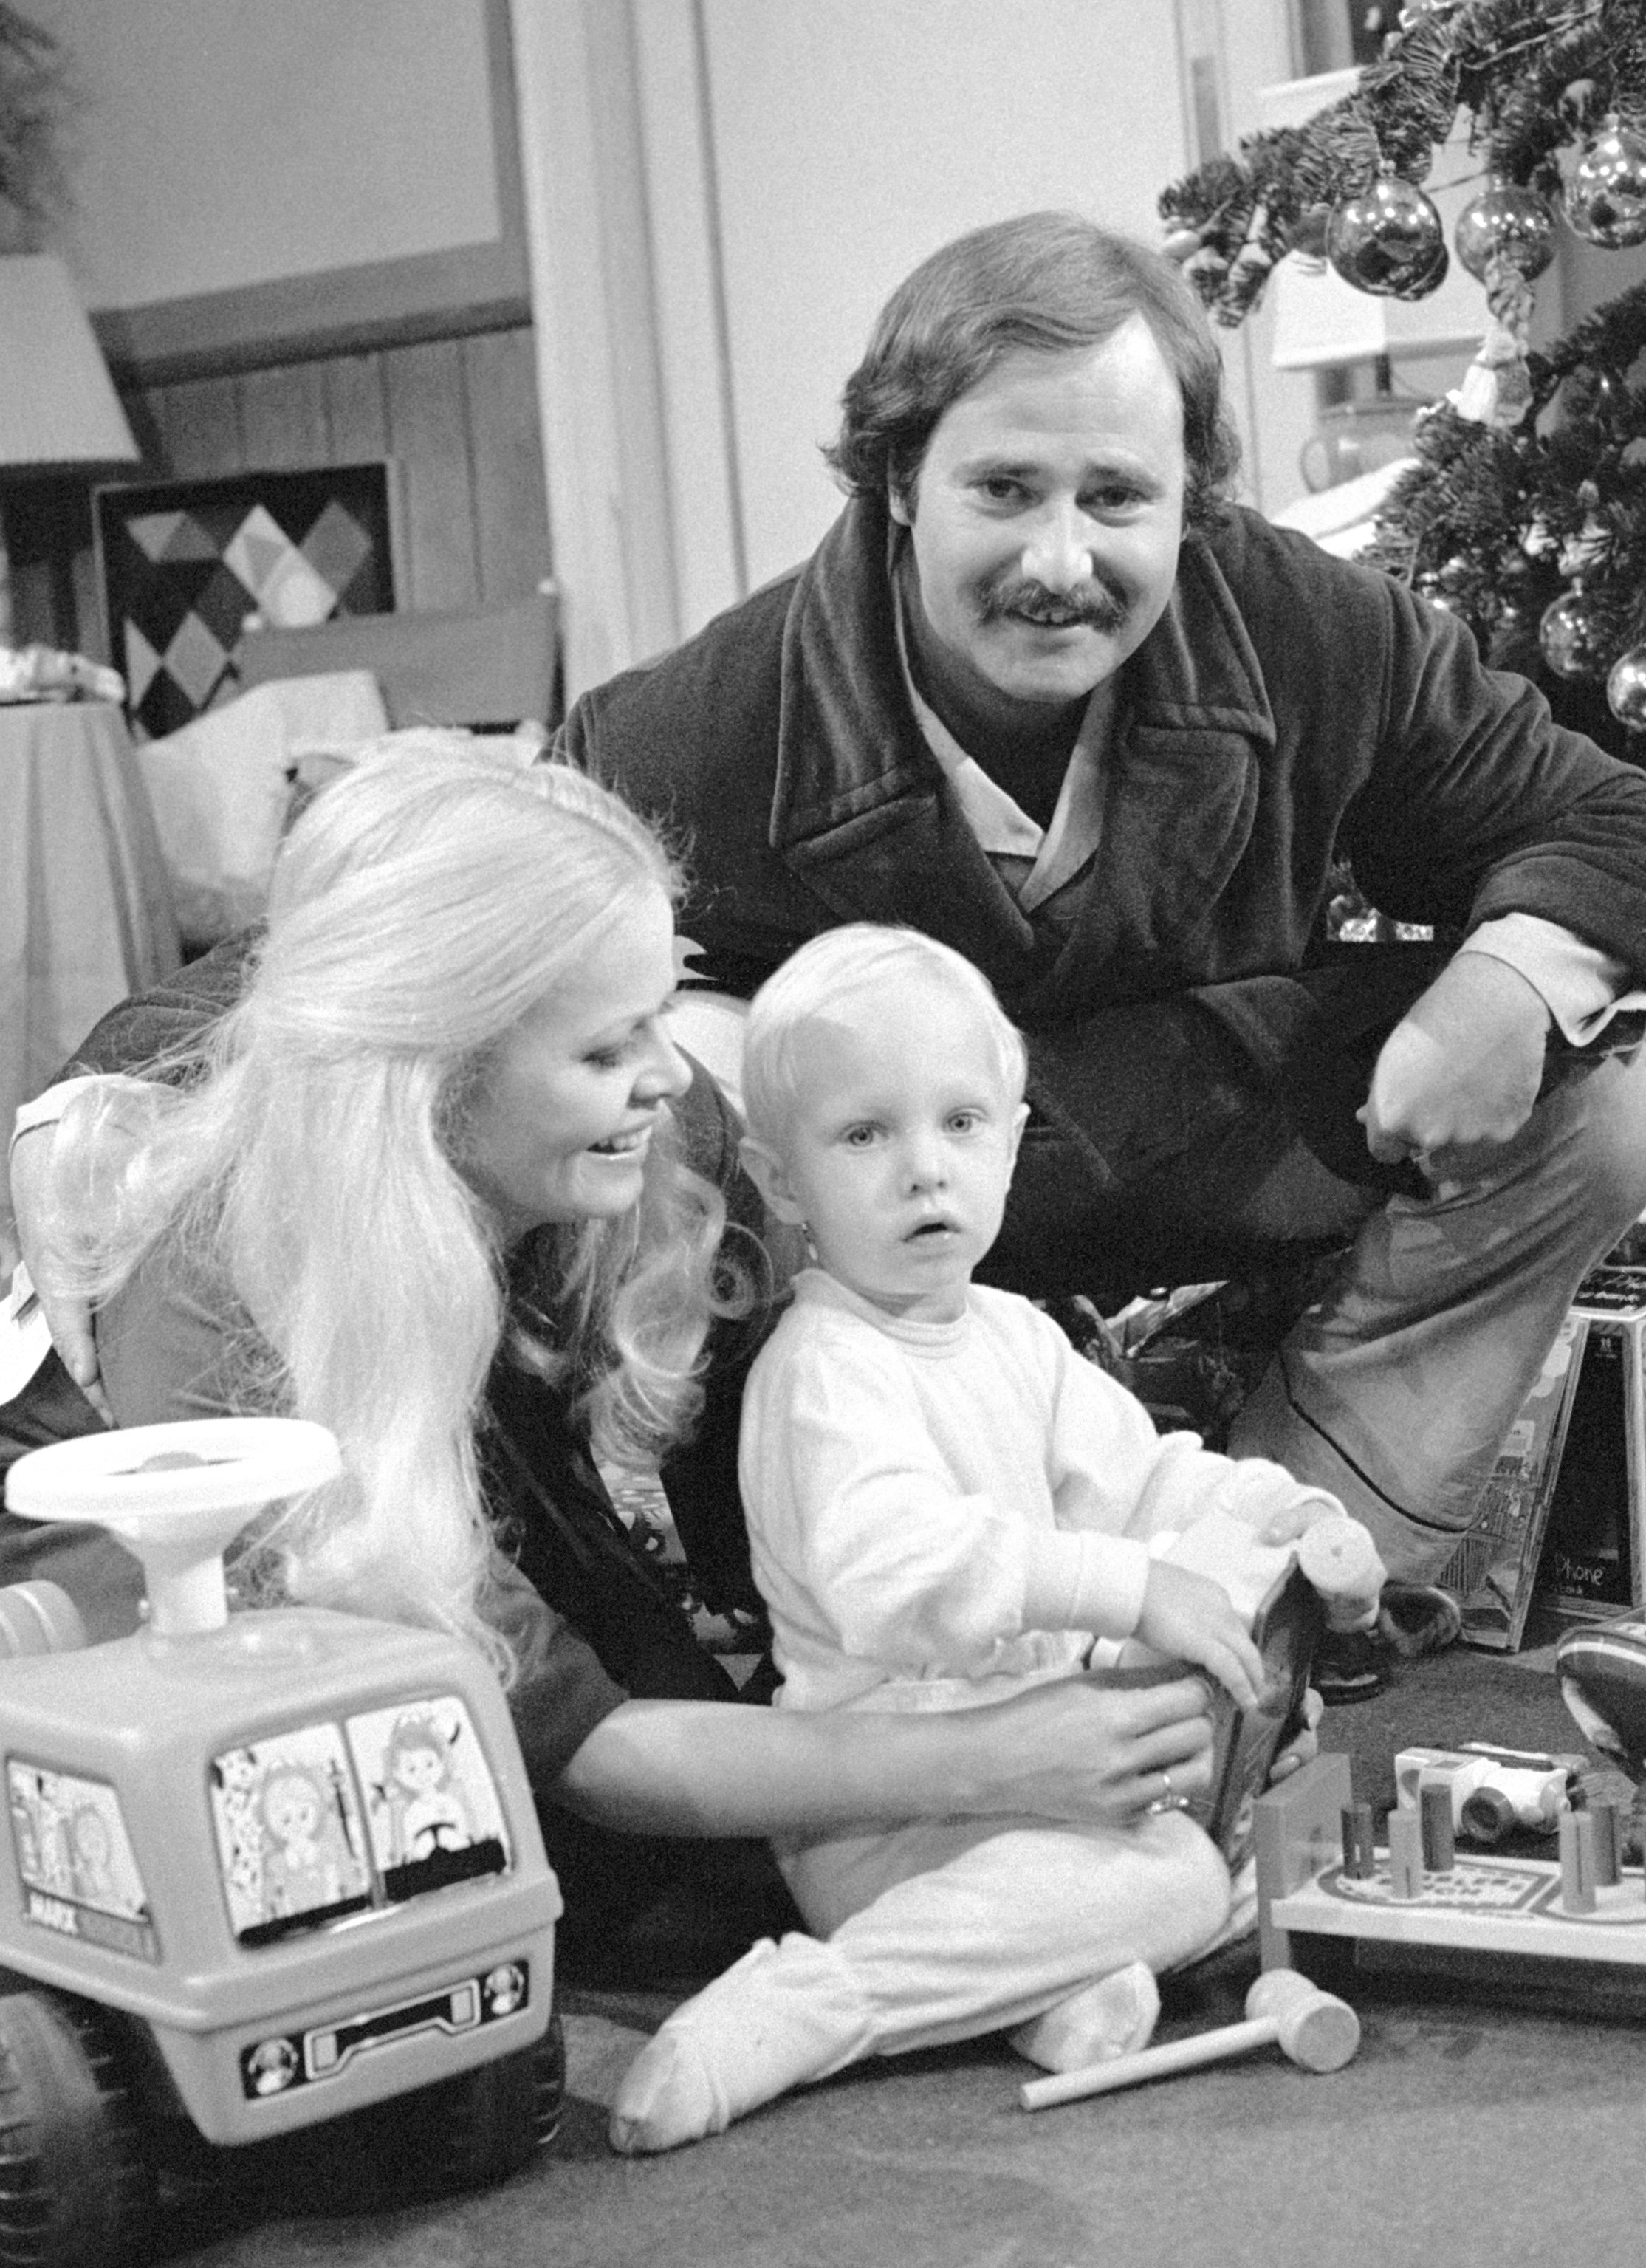  "All in the Family" cast members Sally Struthers (as Gloria Bunker Stivic), Justin Draeger (as Joey Stivic) and Rob Reiner as Michael Stivic | Source: Getty Images